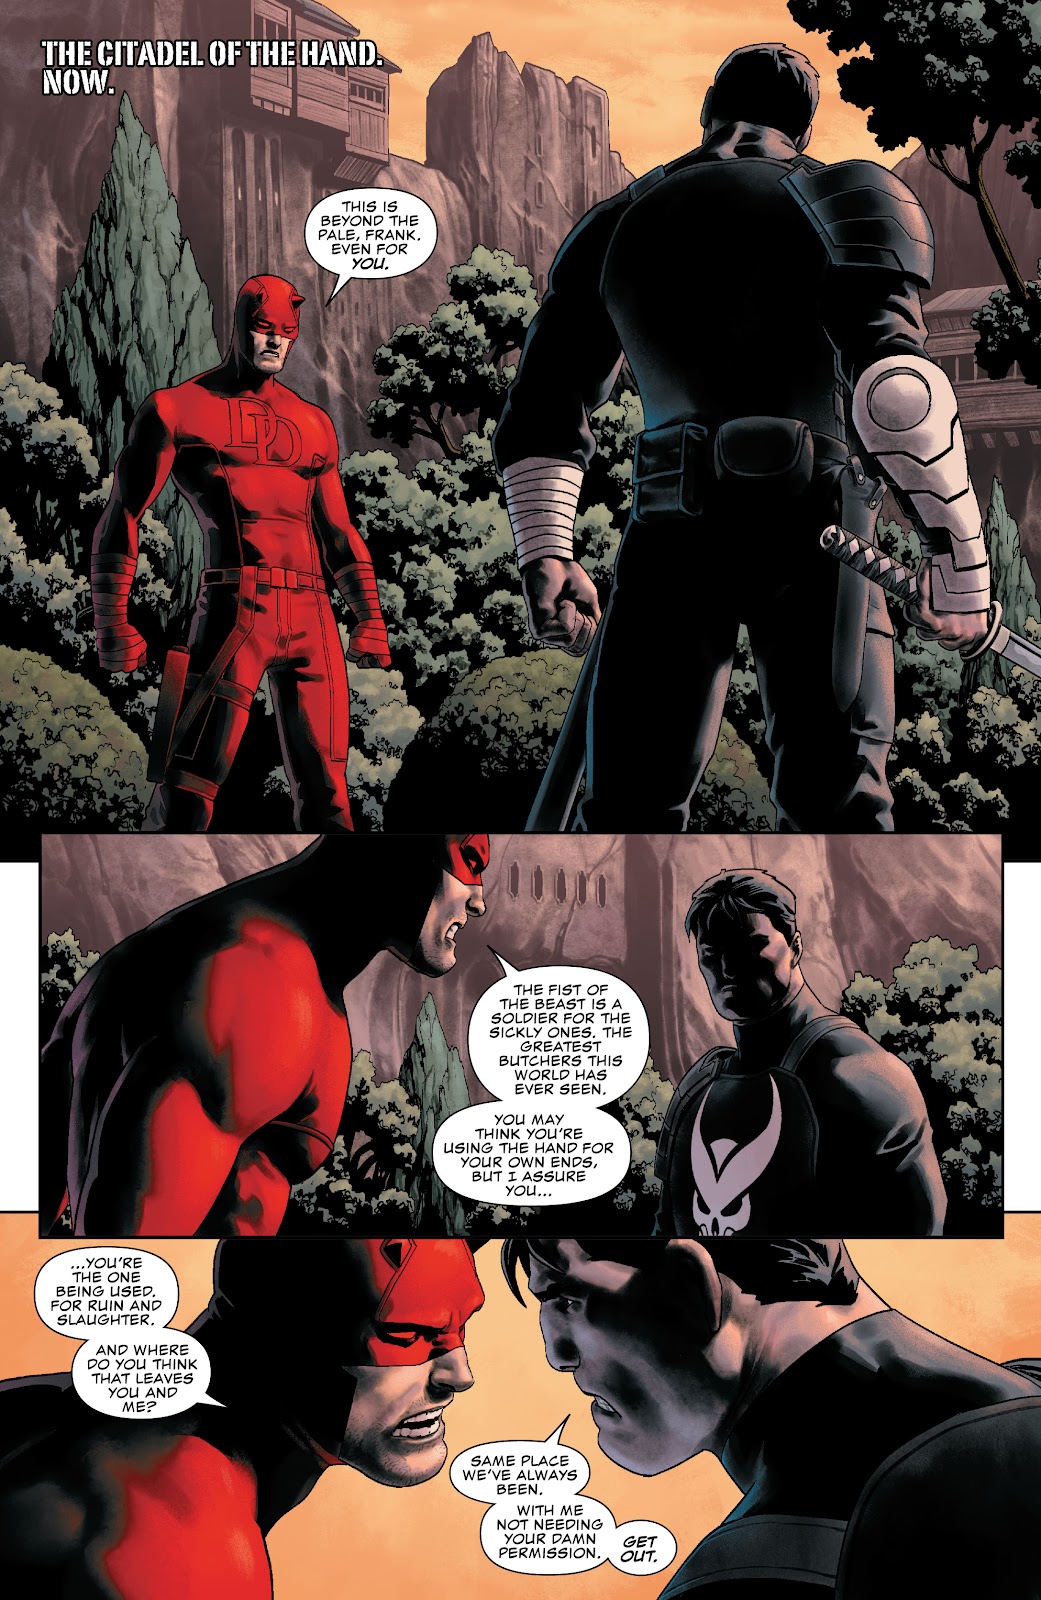 The Punisher (The Hand) VS Daredevil